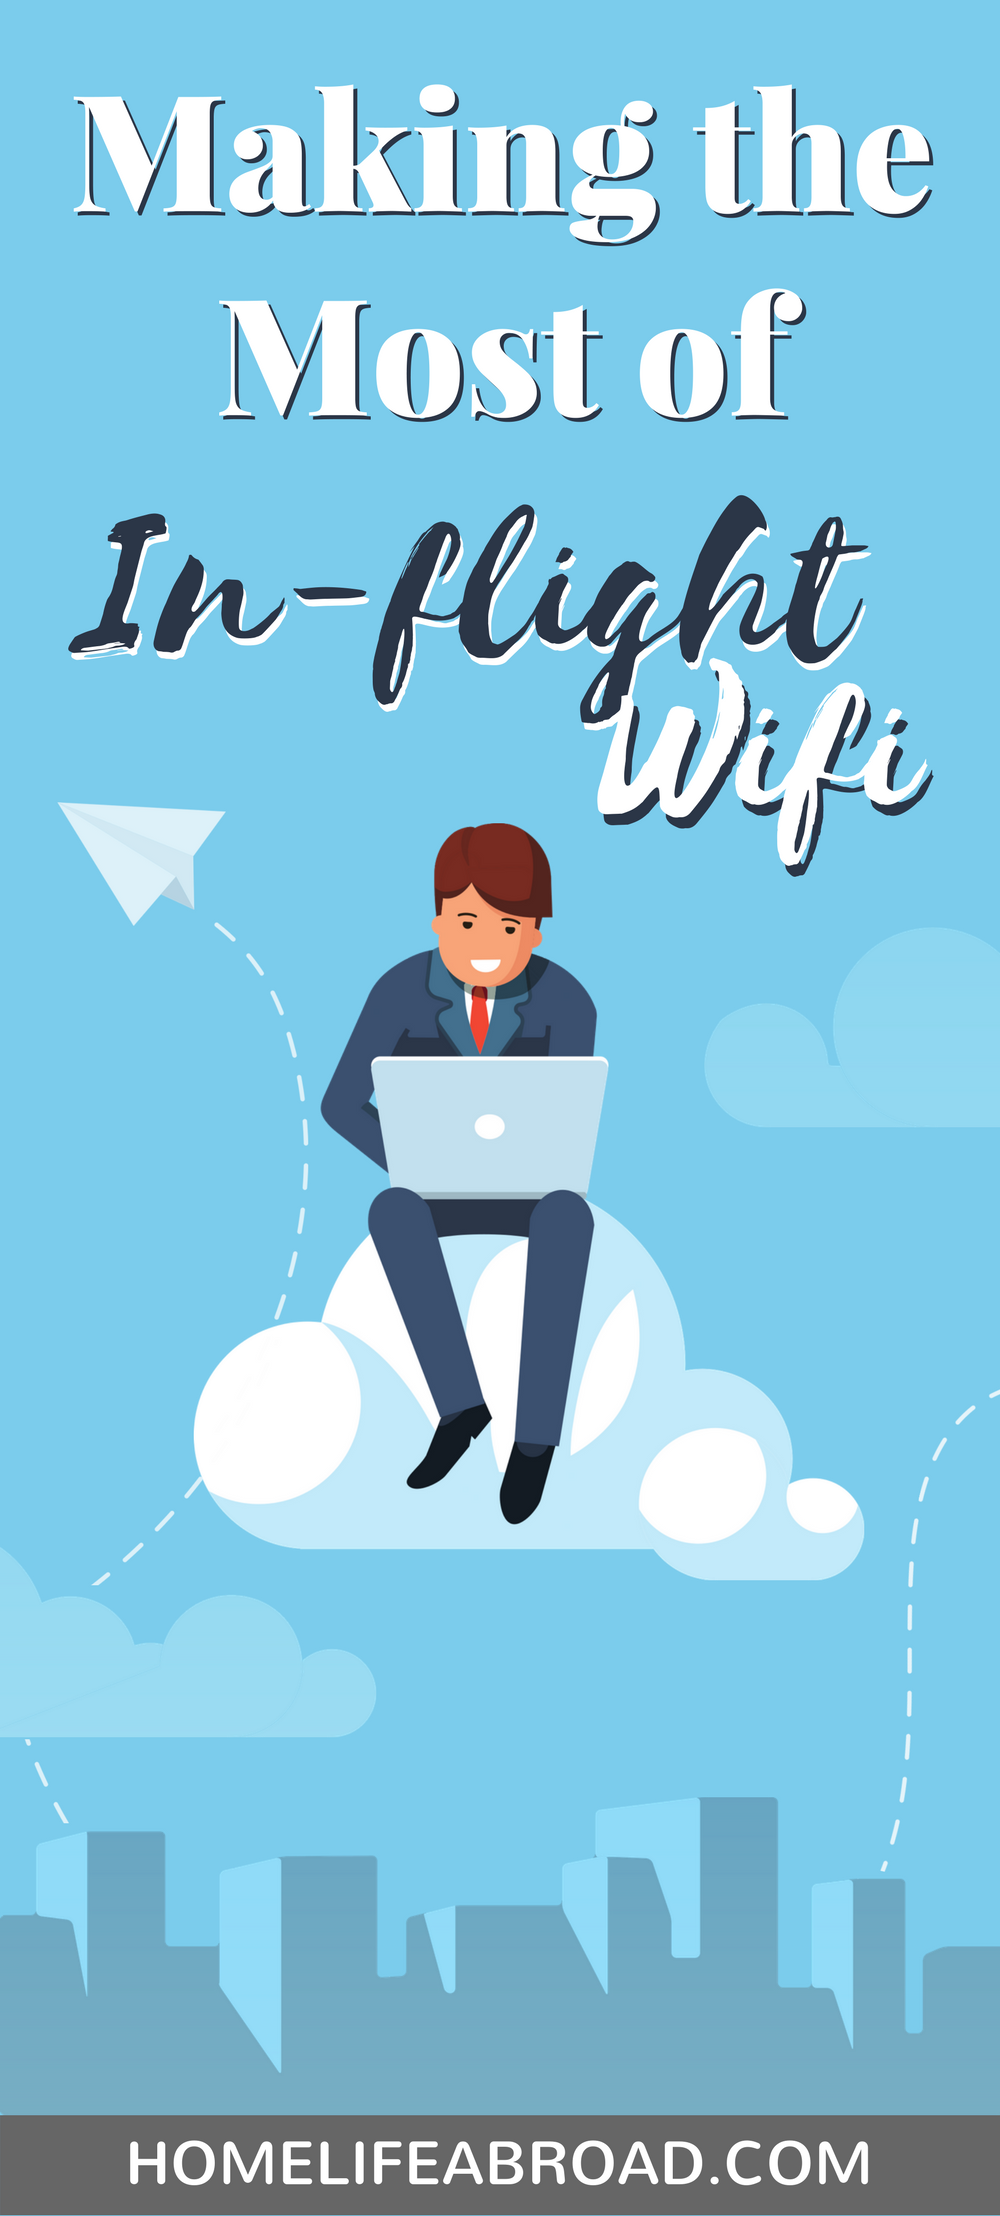 Now that there's widely available in-flight wi-fi, how can you take advantage of it? Check out the following suggestions and make the most of it! #wifi #flights #flightentertainment #netflix #travel